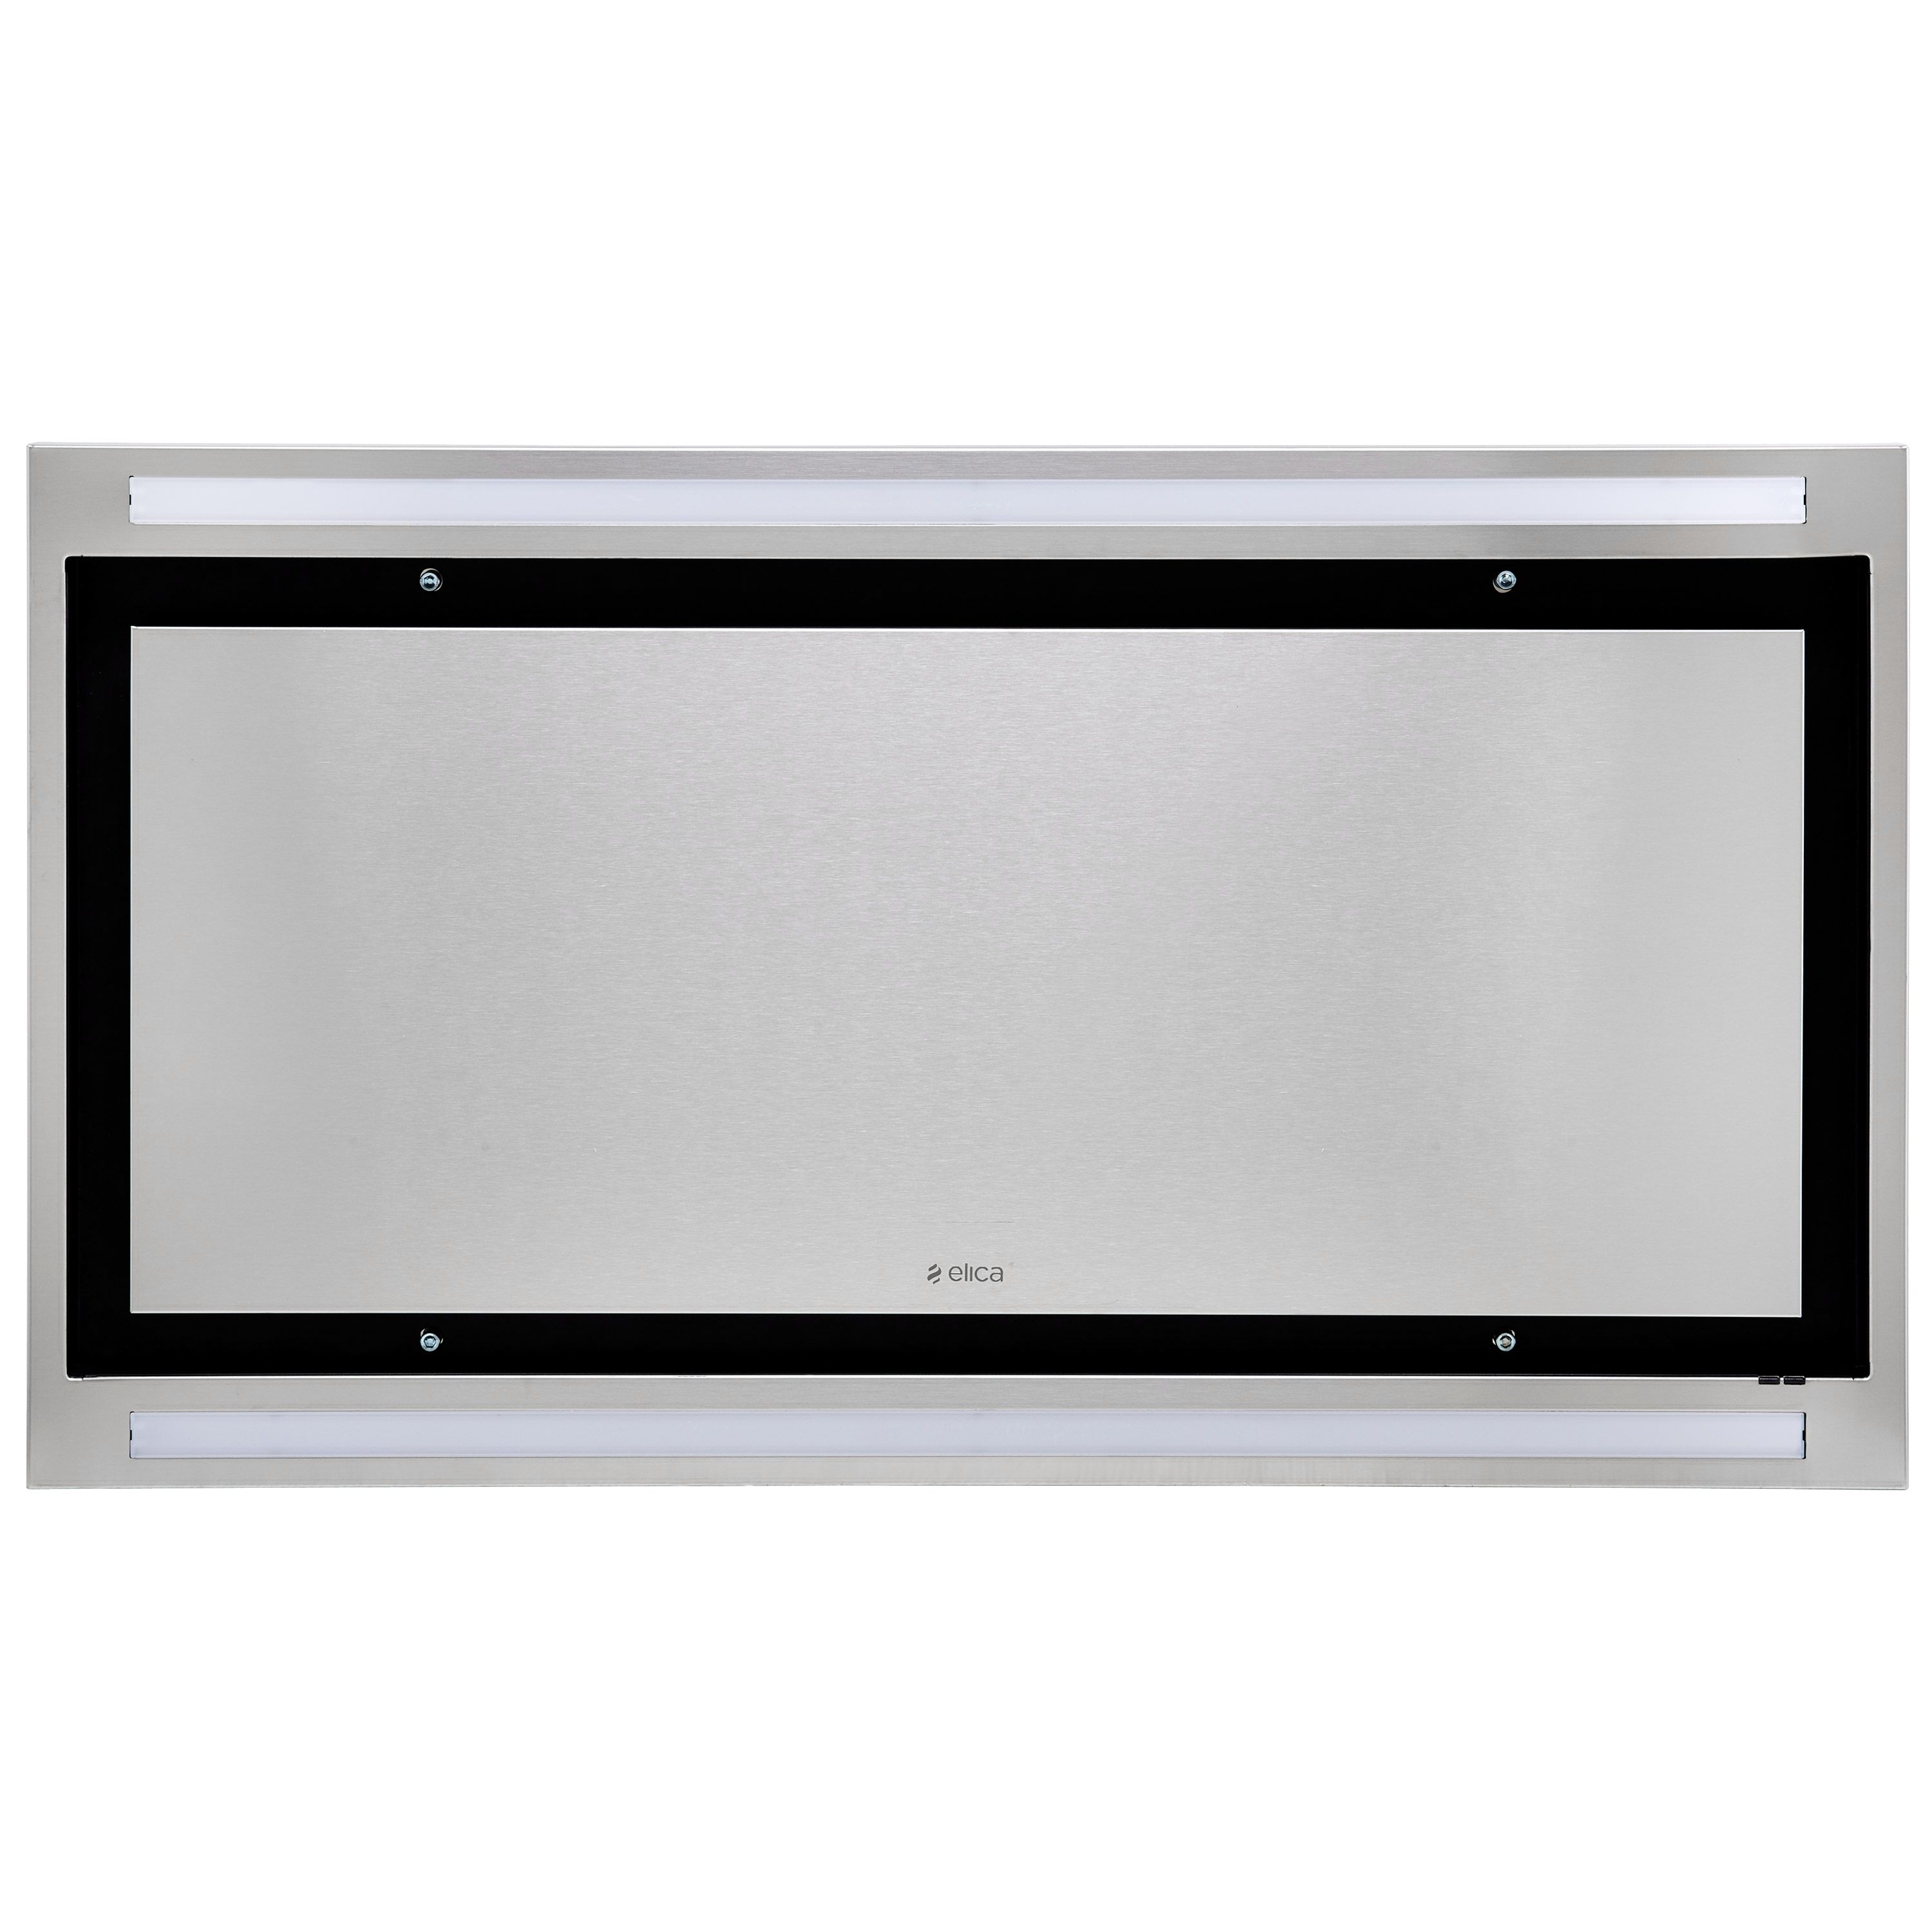 CLOUD-SEVEN-DO Stainless steel Ceiling Cooker hood (W)89.9cm